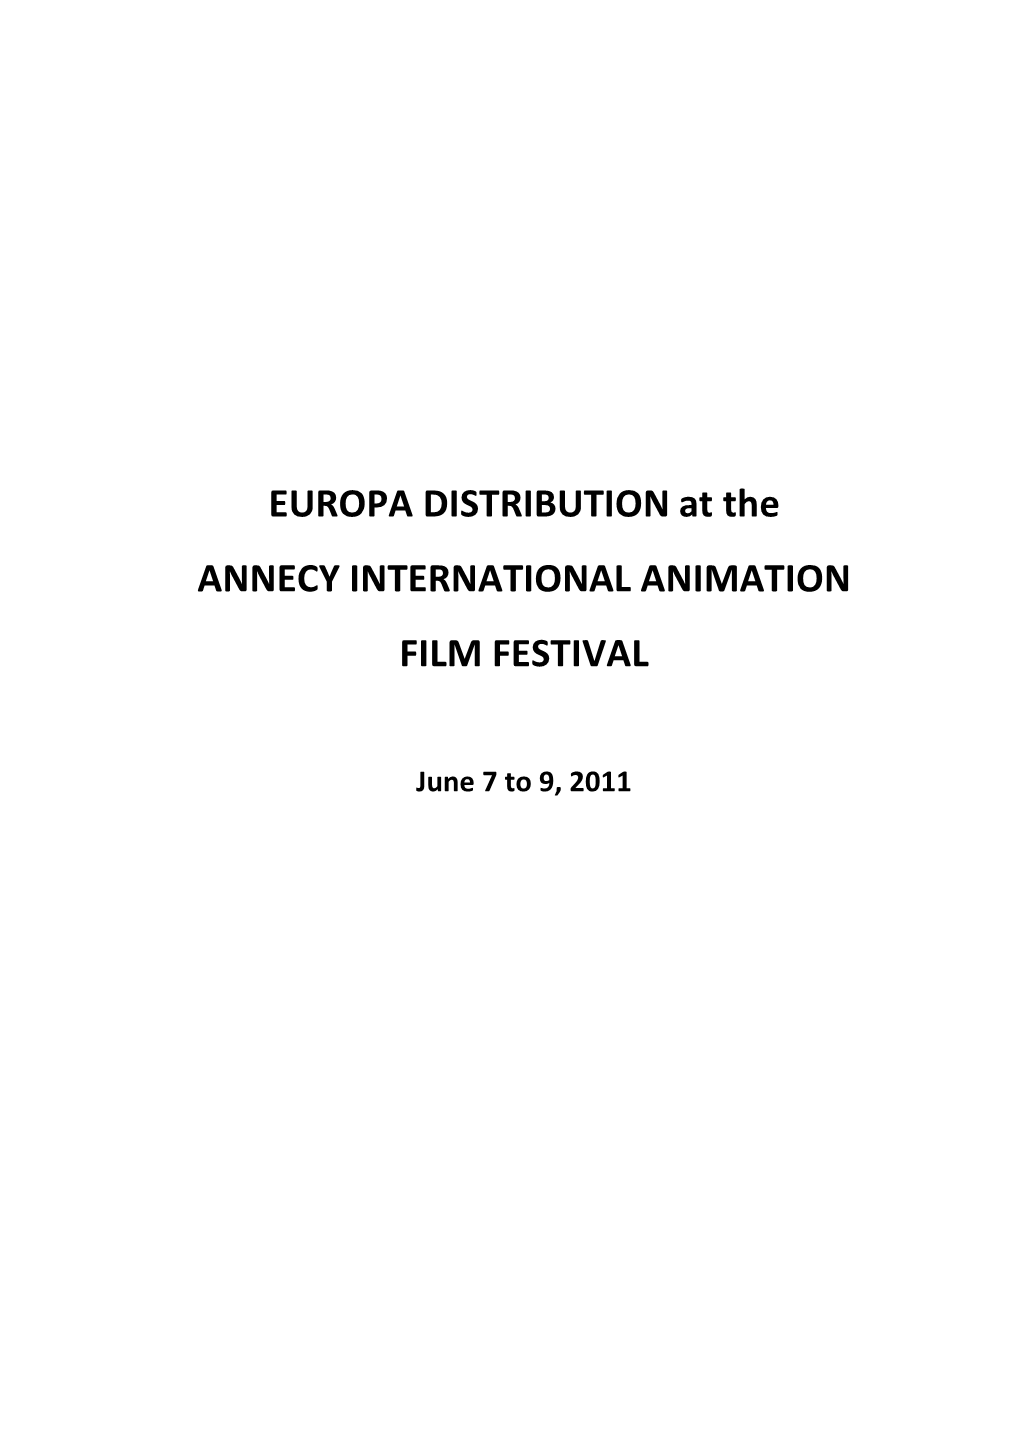 EUROPA DISTRIBUTION at the ANNECY INTERNATIONAL ANIMATION FILM FESTIVAL